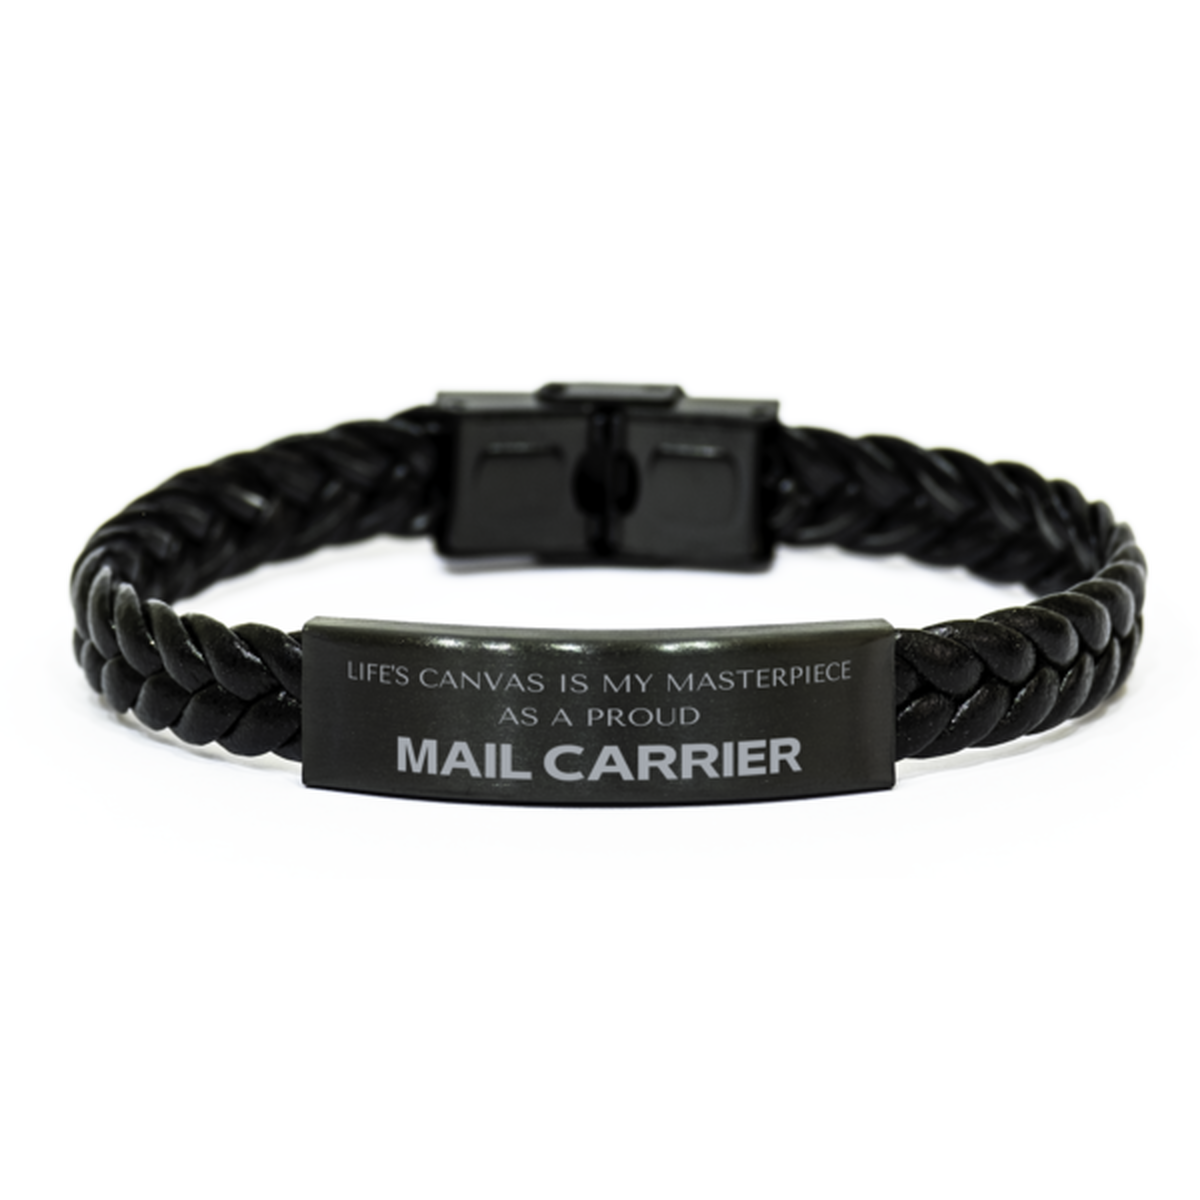 Proud Mail Carrier Gifts, Life's canvas is my masterpiece, Epic Birthday Christmas Unique Braided Leather Bracelet For Mail Carrier, Coworkers, Men, Women, Friends